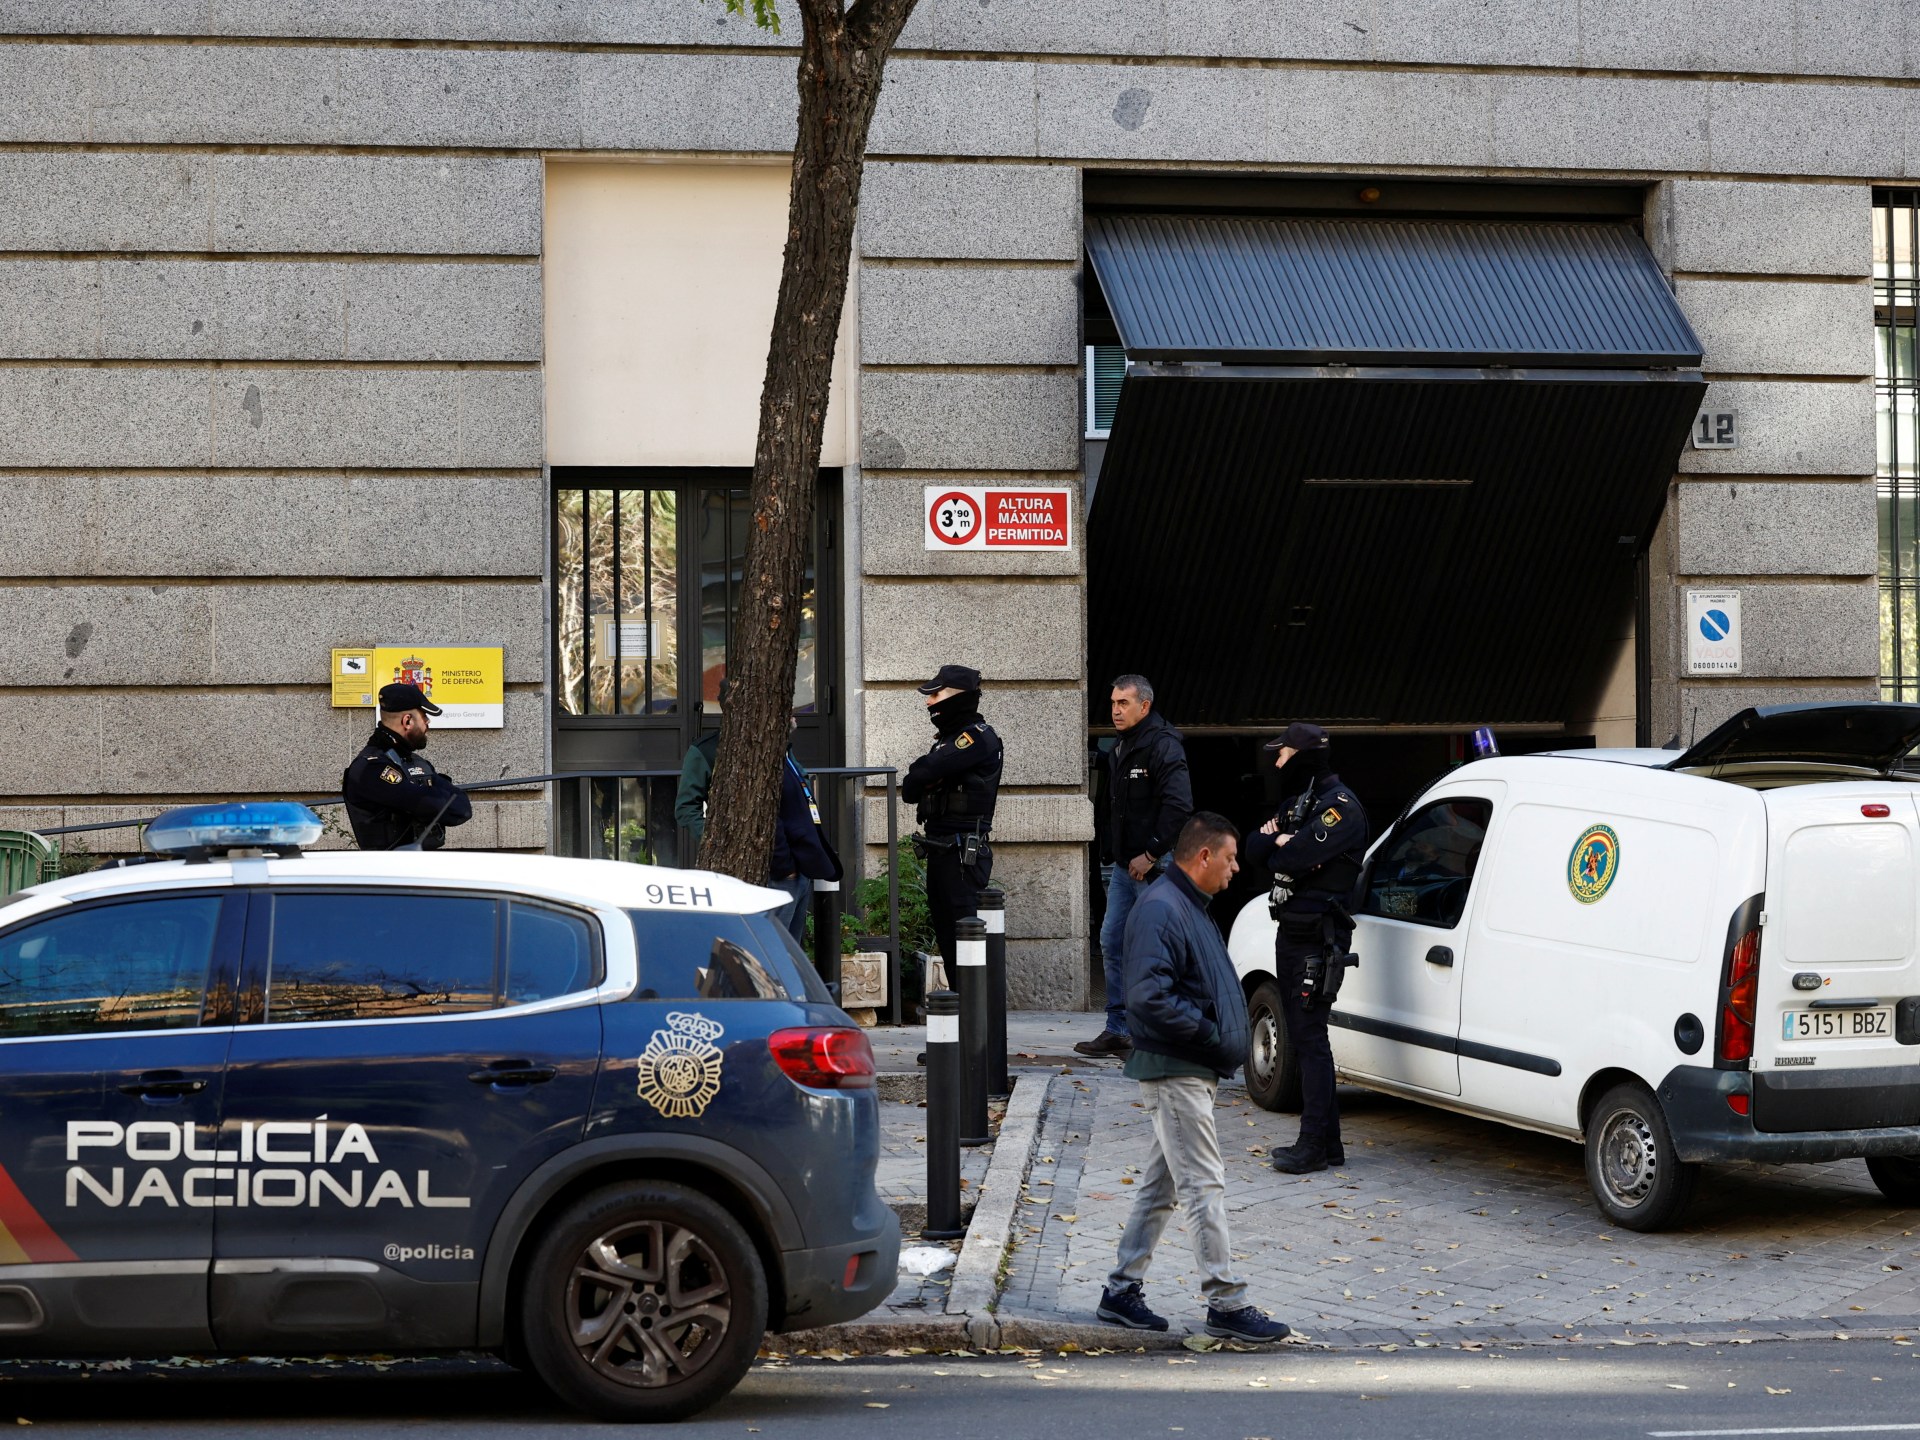 US embassy, five other sites targeted by letter bombs in Spain